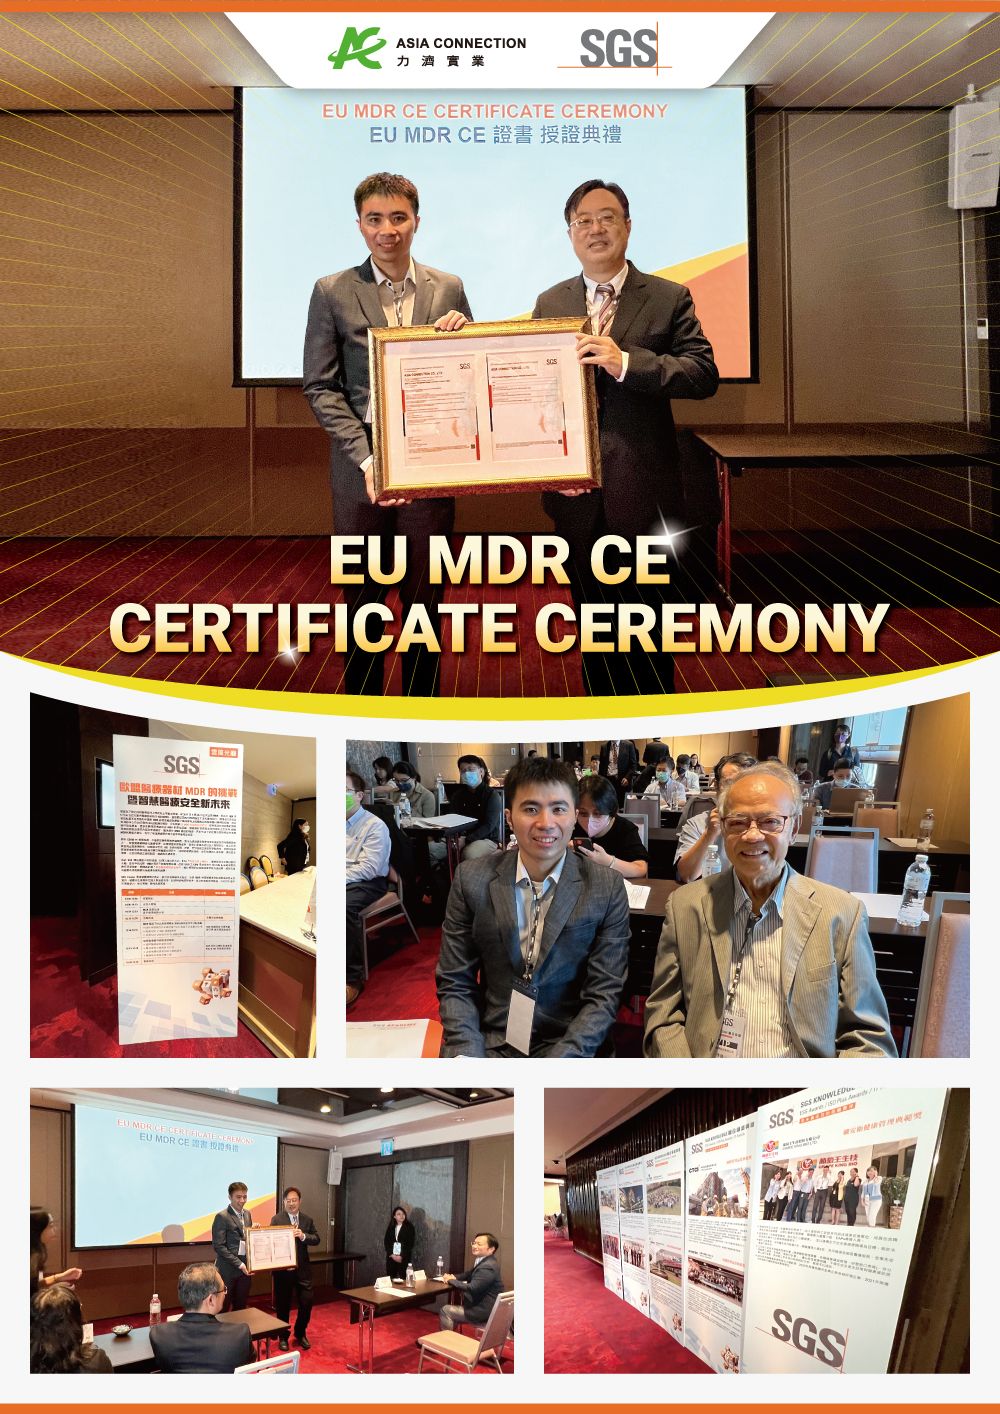 Asia Connection's ME8202X- Powered Nasal Aspirator Achieves CE Certification under the EU 2017/745 Medical Device Regulation (MDR)